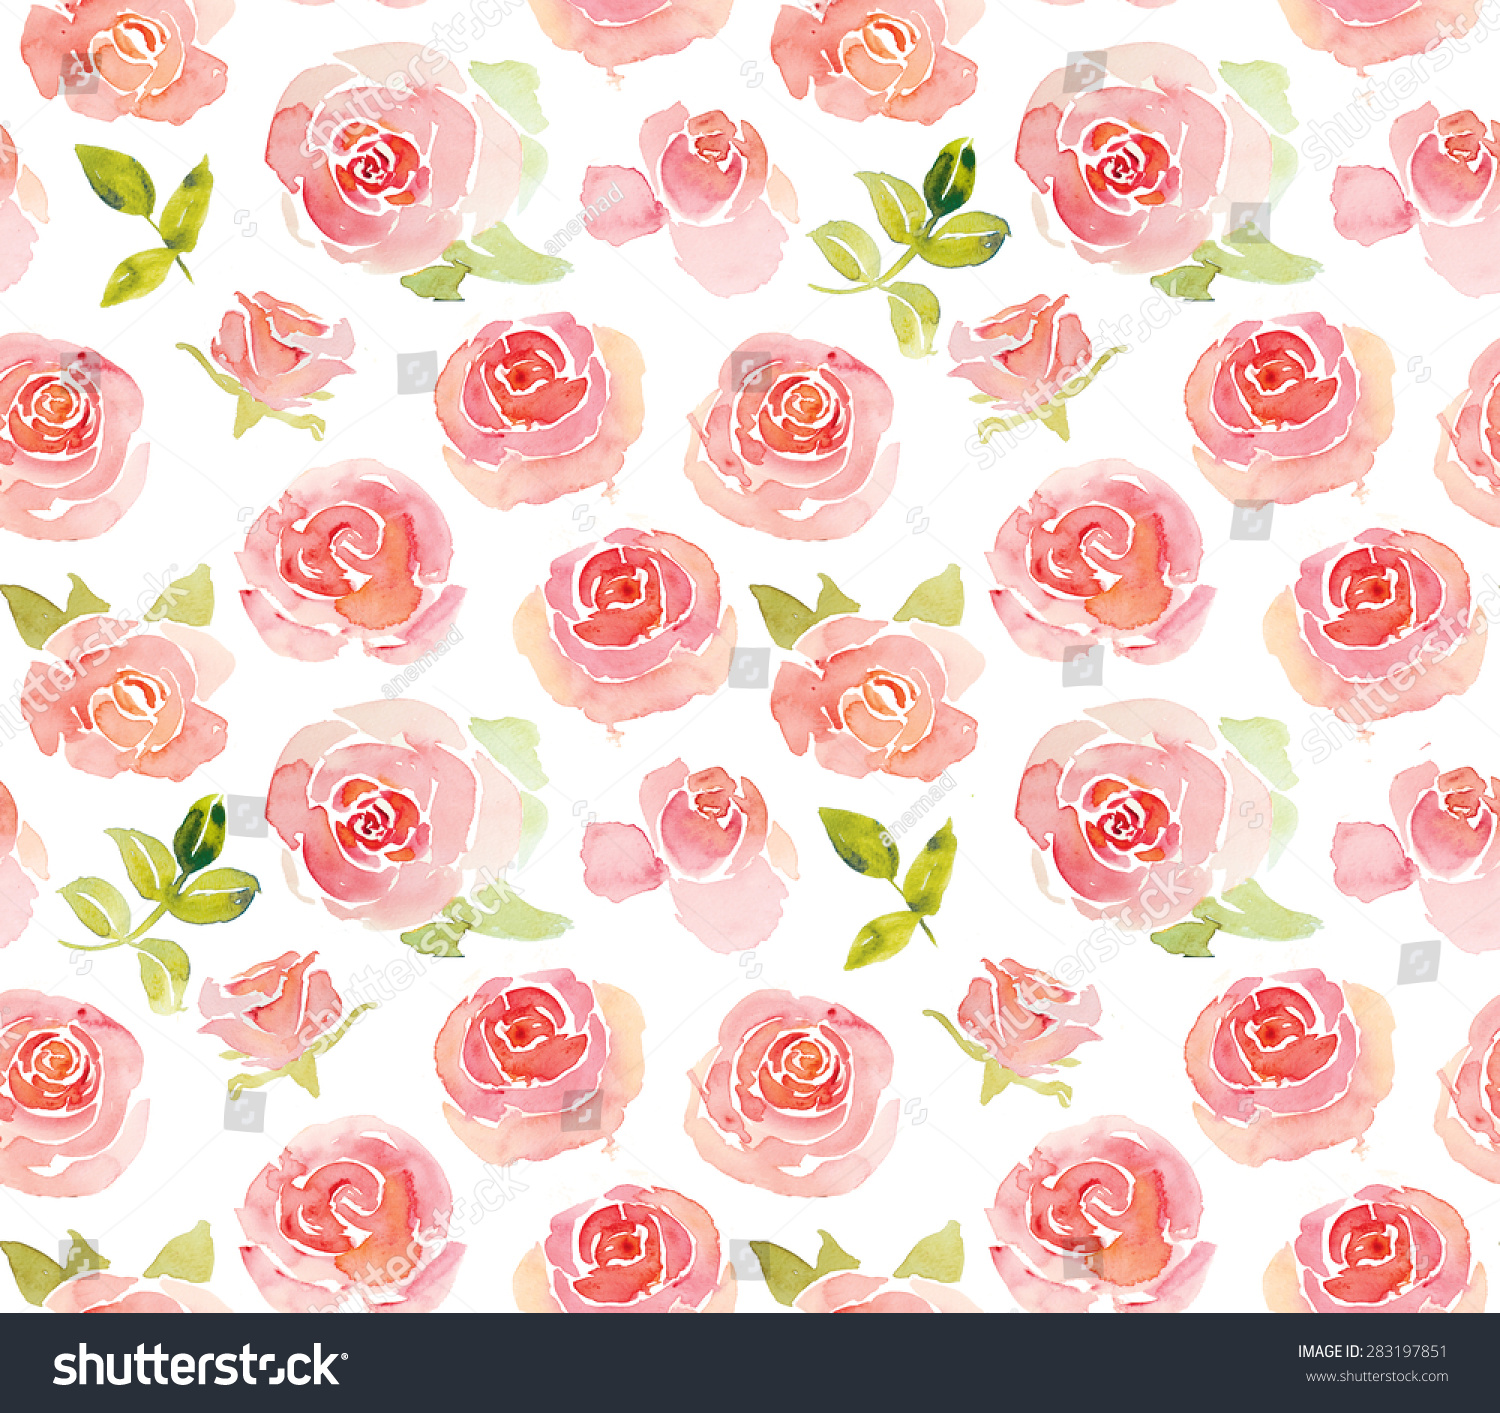 Abstract Pink Roses Flower Watercolor Seamless Stock Illustration ...